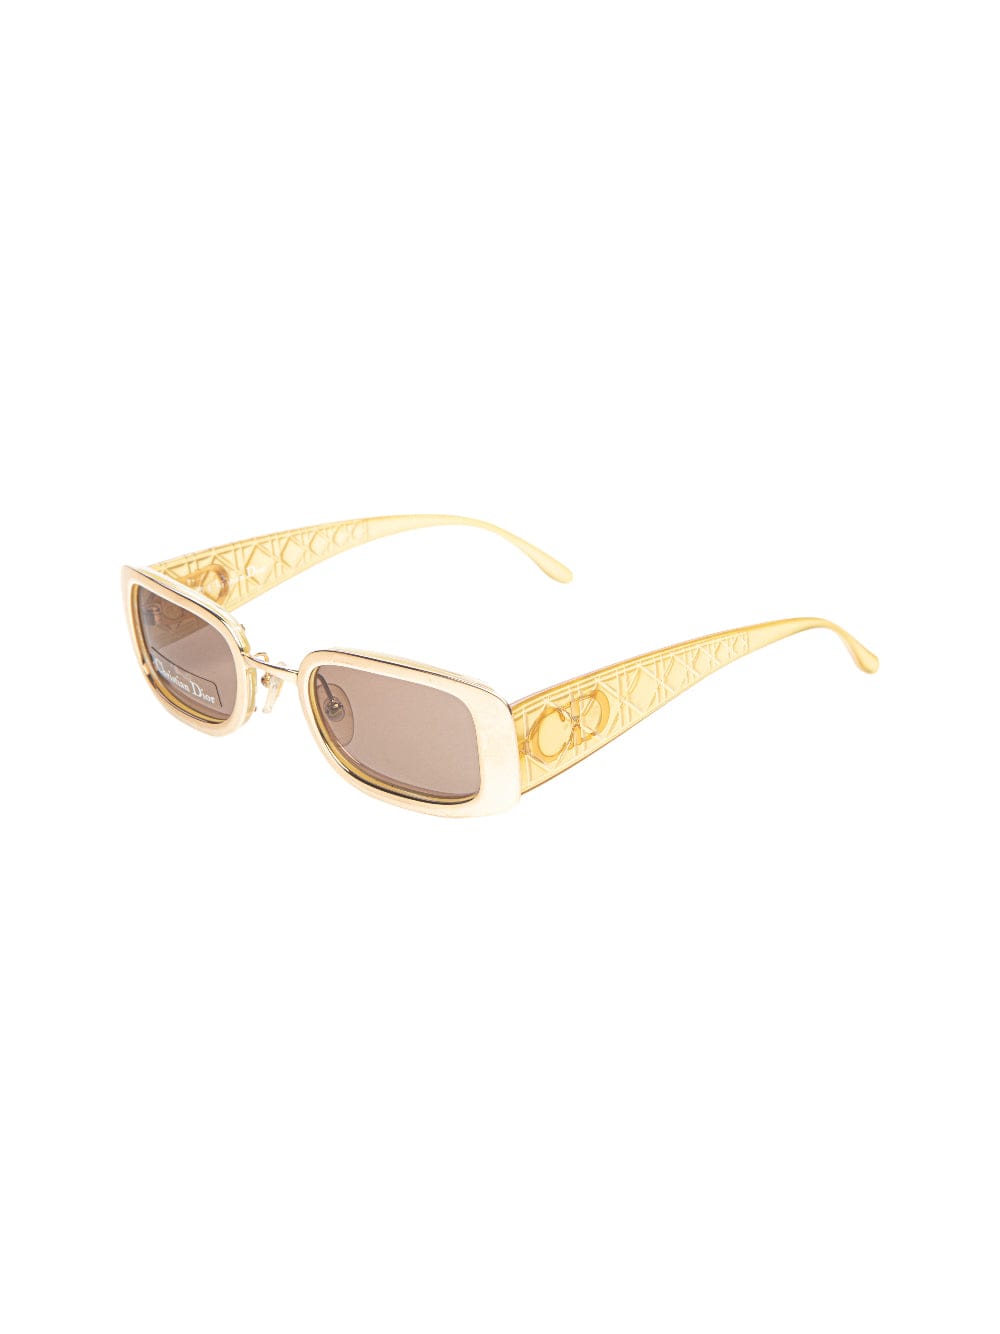 Dior Ice - Limited Edition - Gold Sunglasses